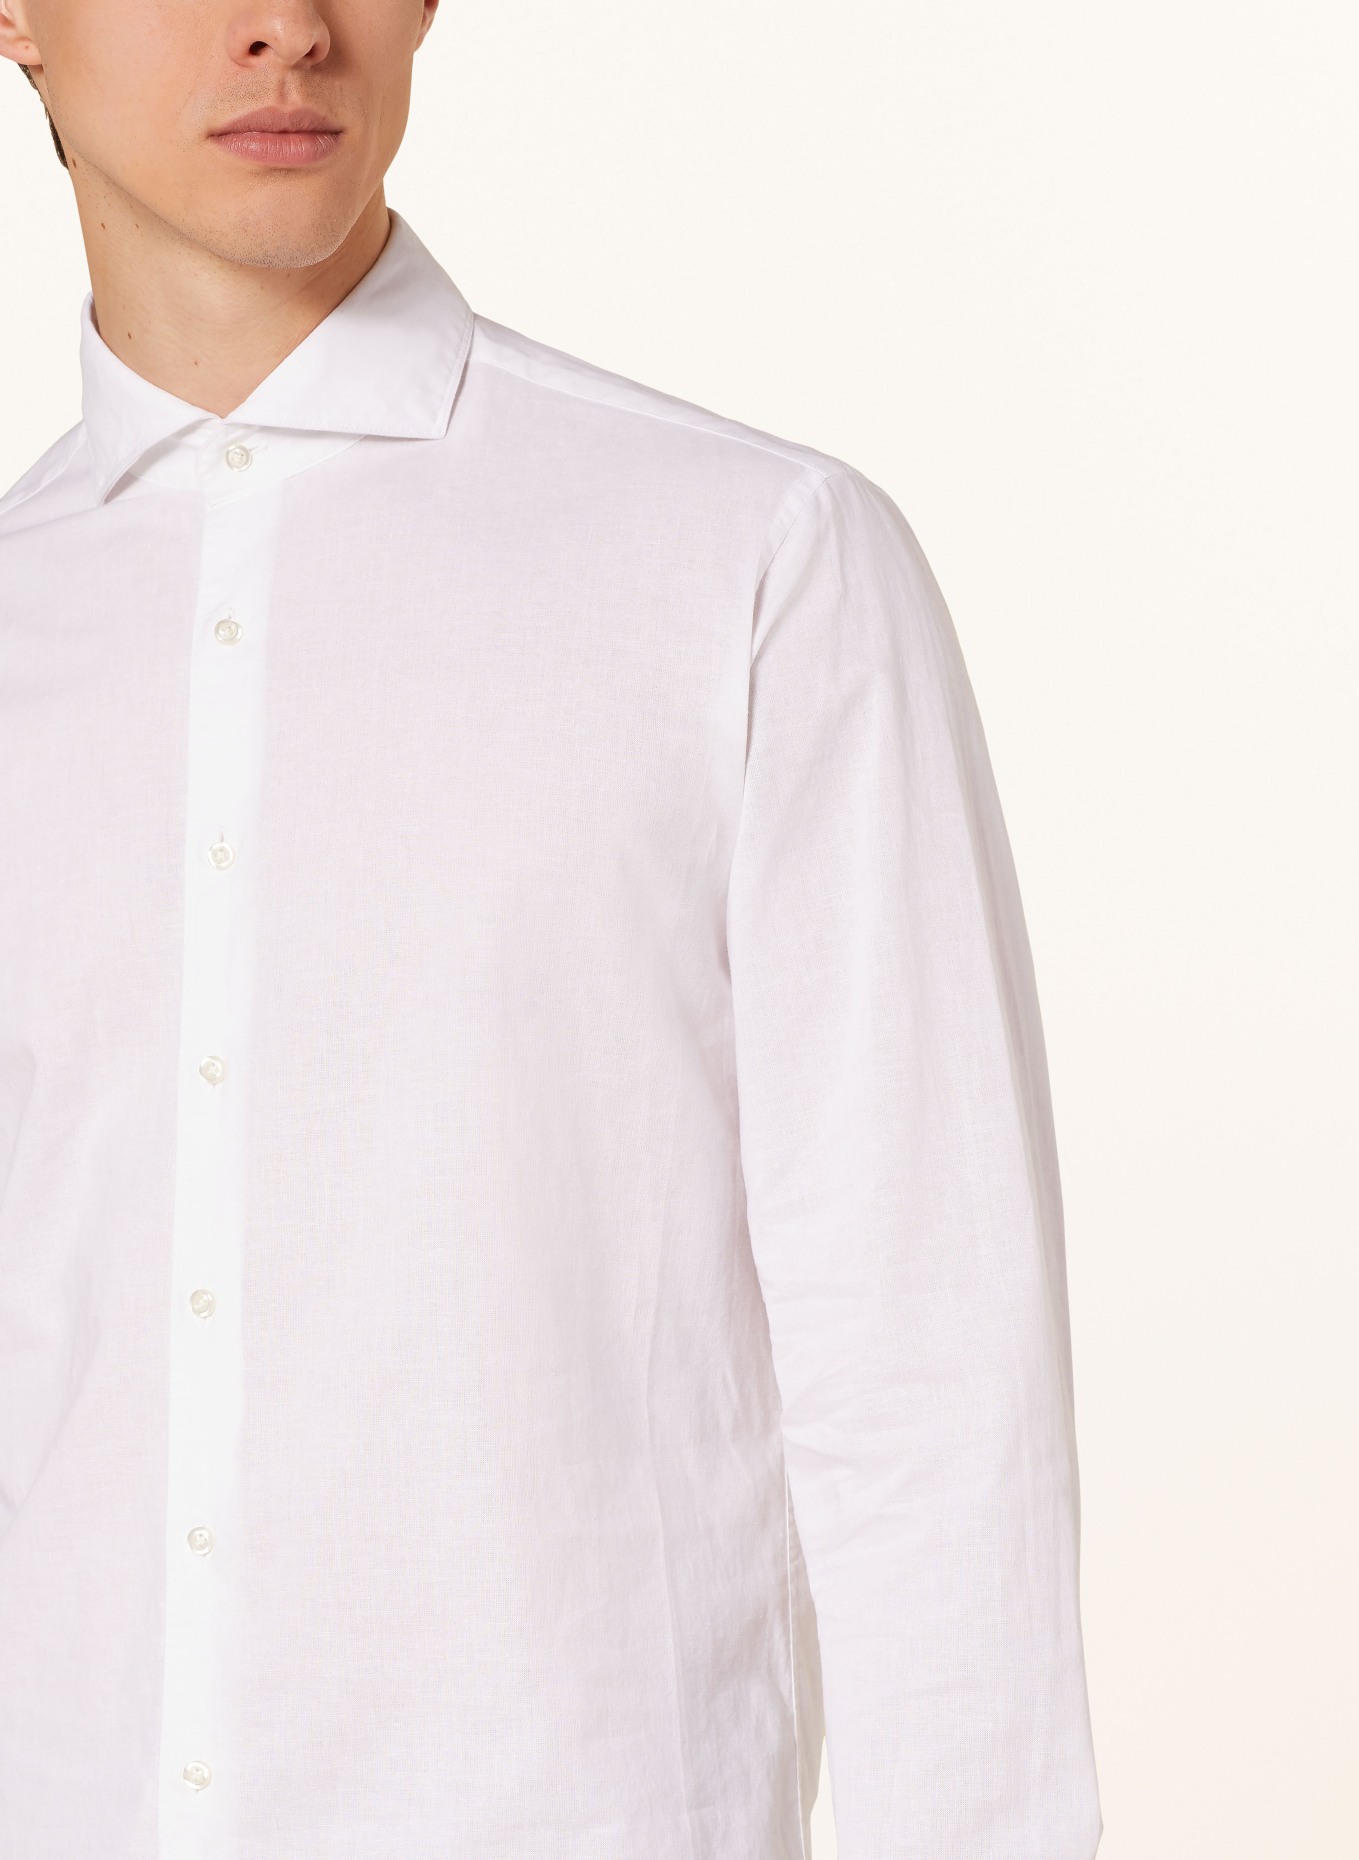 STROKESMAN'S Shirt regular fit with linen, Color: WHITE (Image 4)